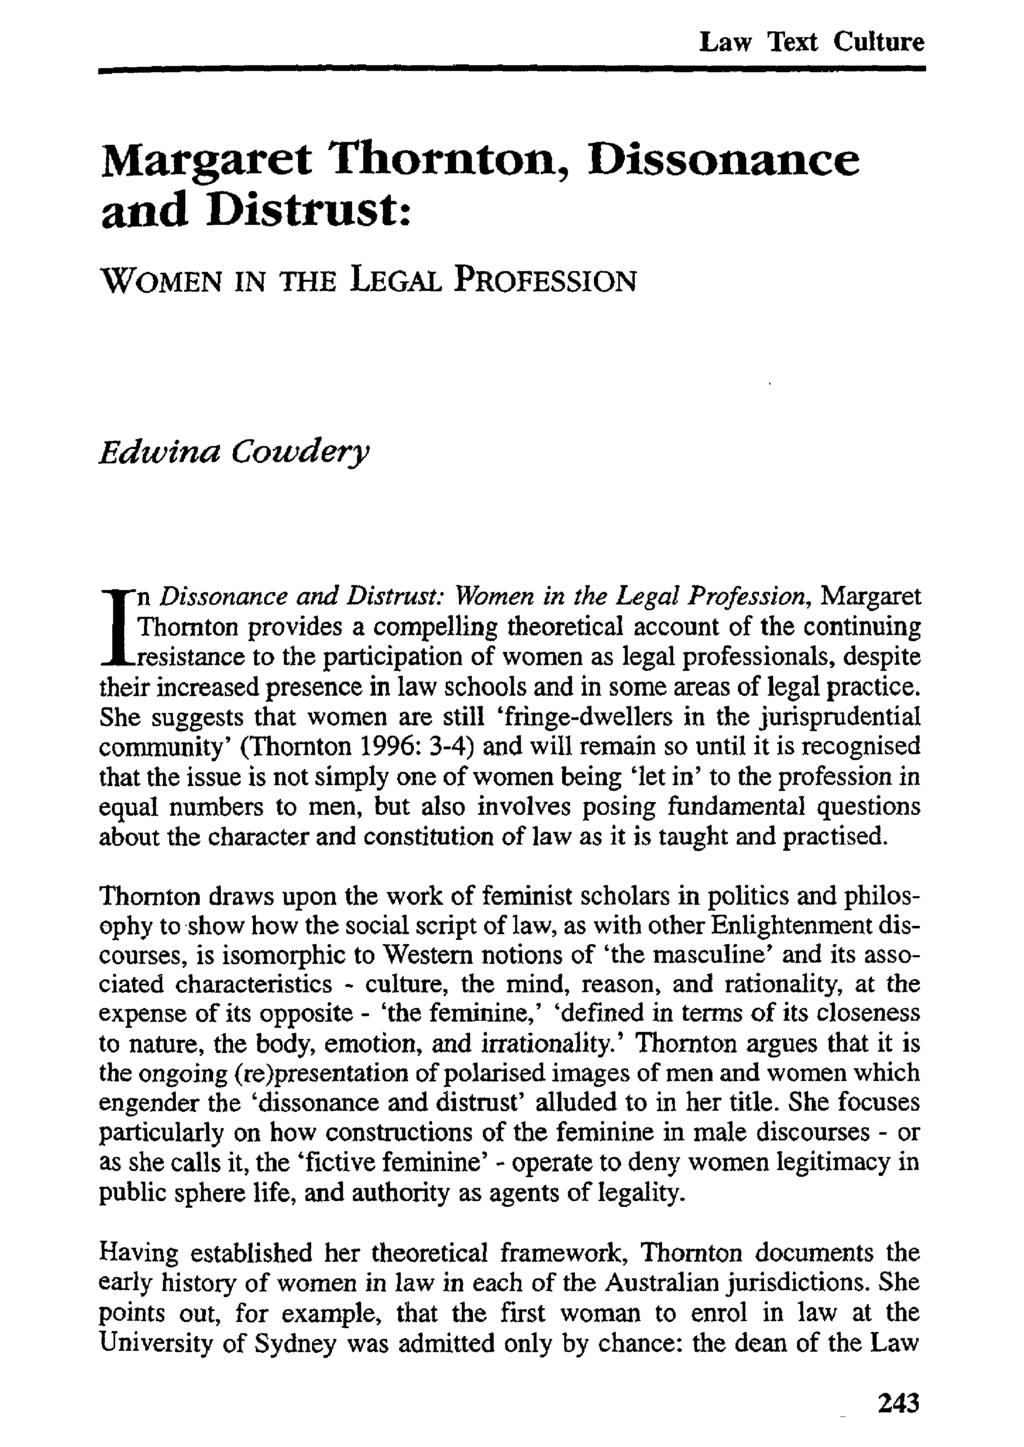 Margaret Thornton, Dissonance and Distrust: WOMEN IN THE LEGAL PROFESSION Edwina Cowdery InDissonance and Distrust: Women in the Legal Profession, Margaret Thornton provides a compelling theoretical